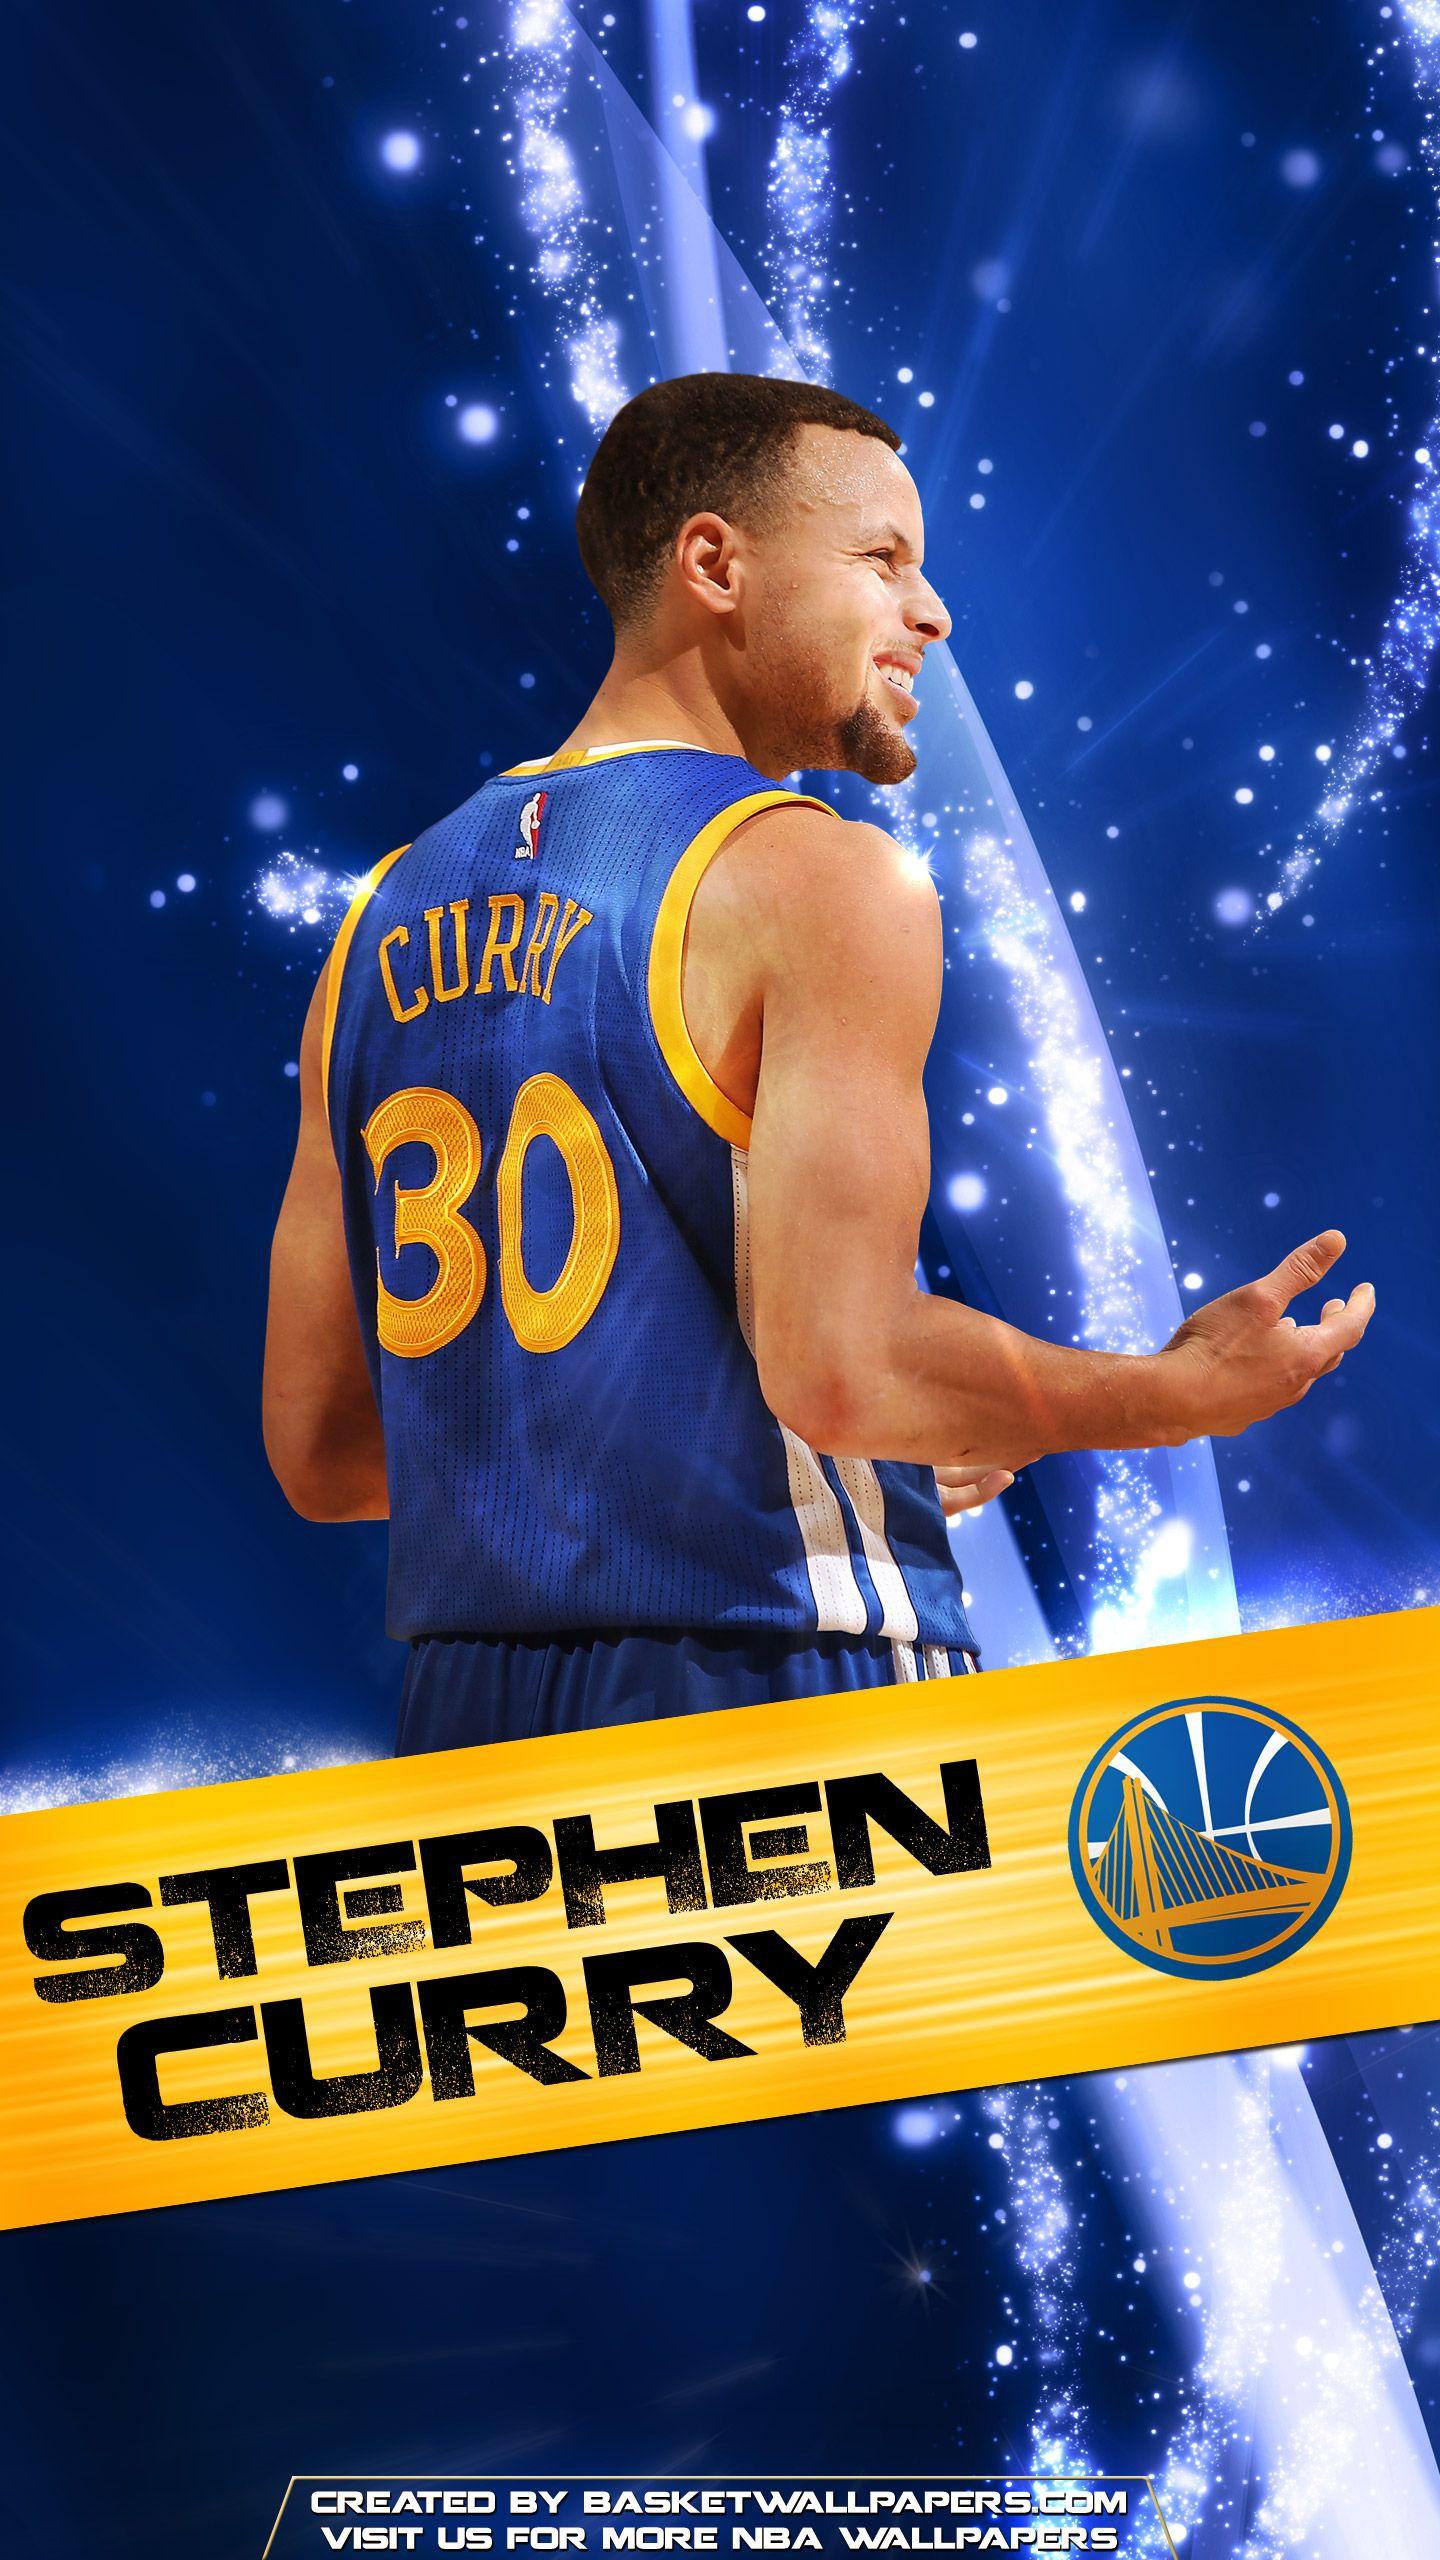 Stephen Curry Wallpaper for iPhone. Wallpaper. Curry